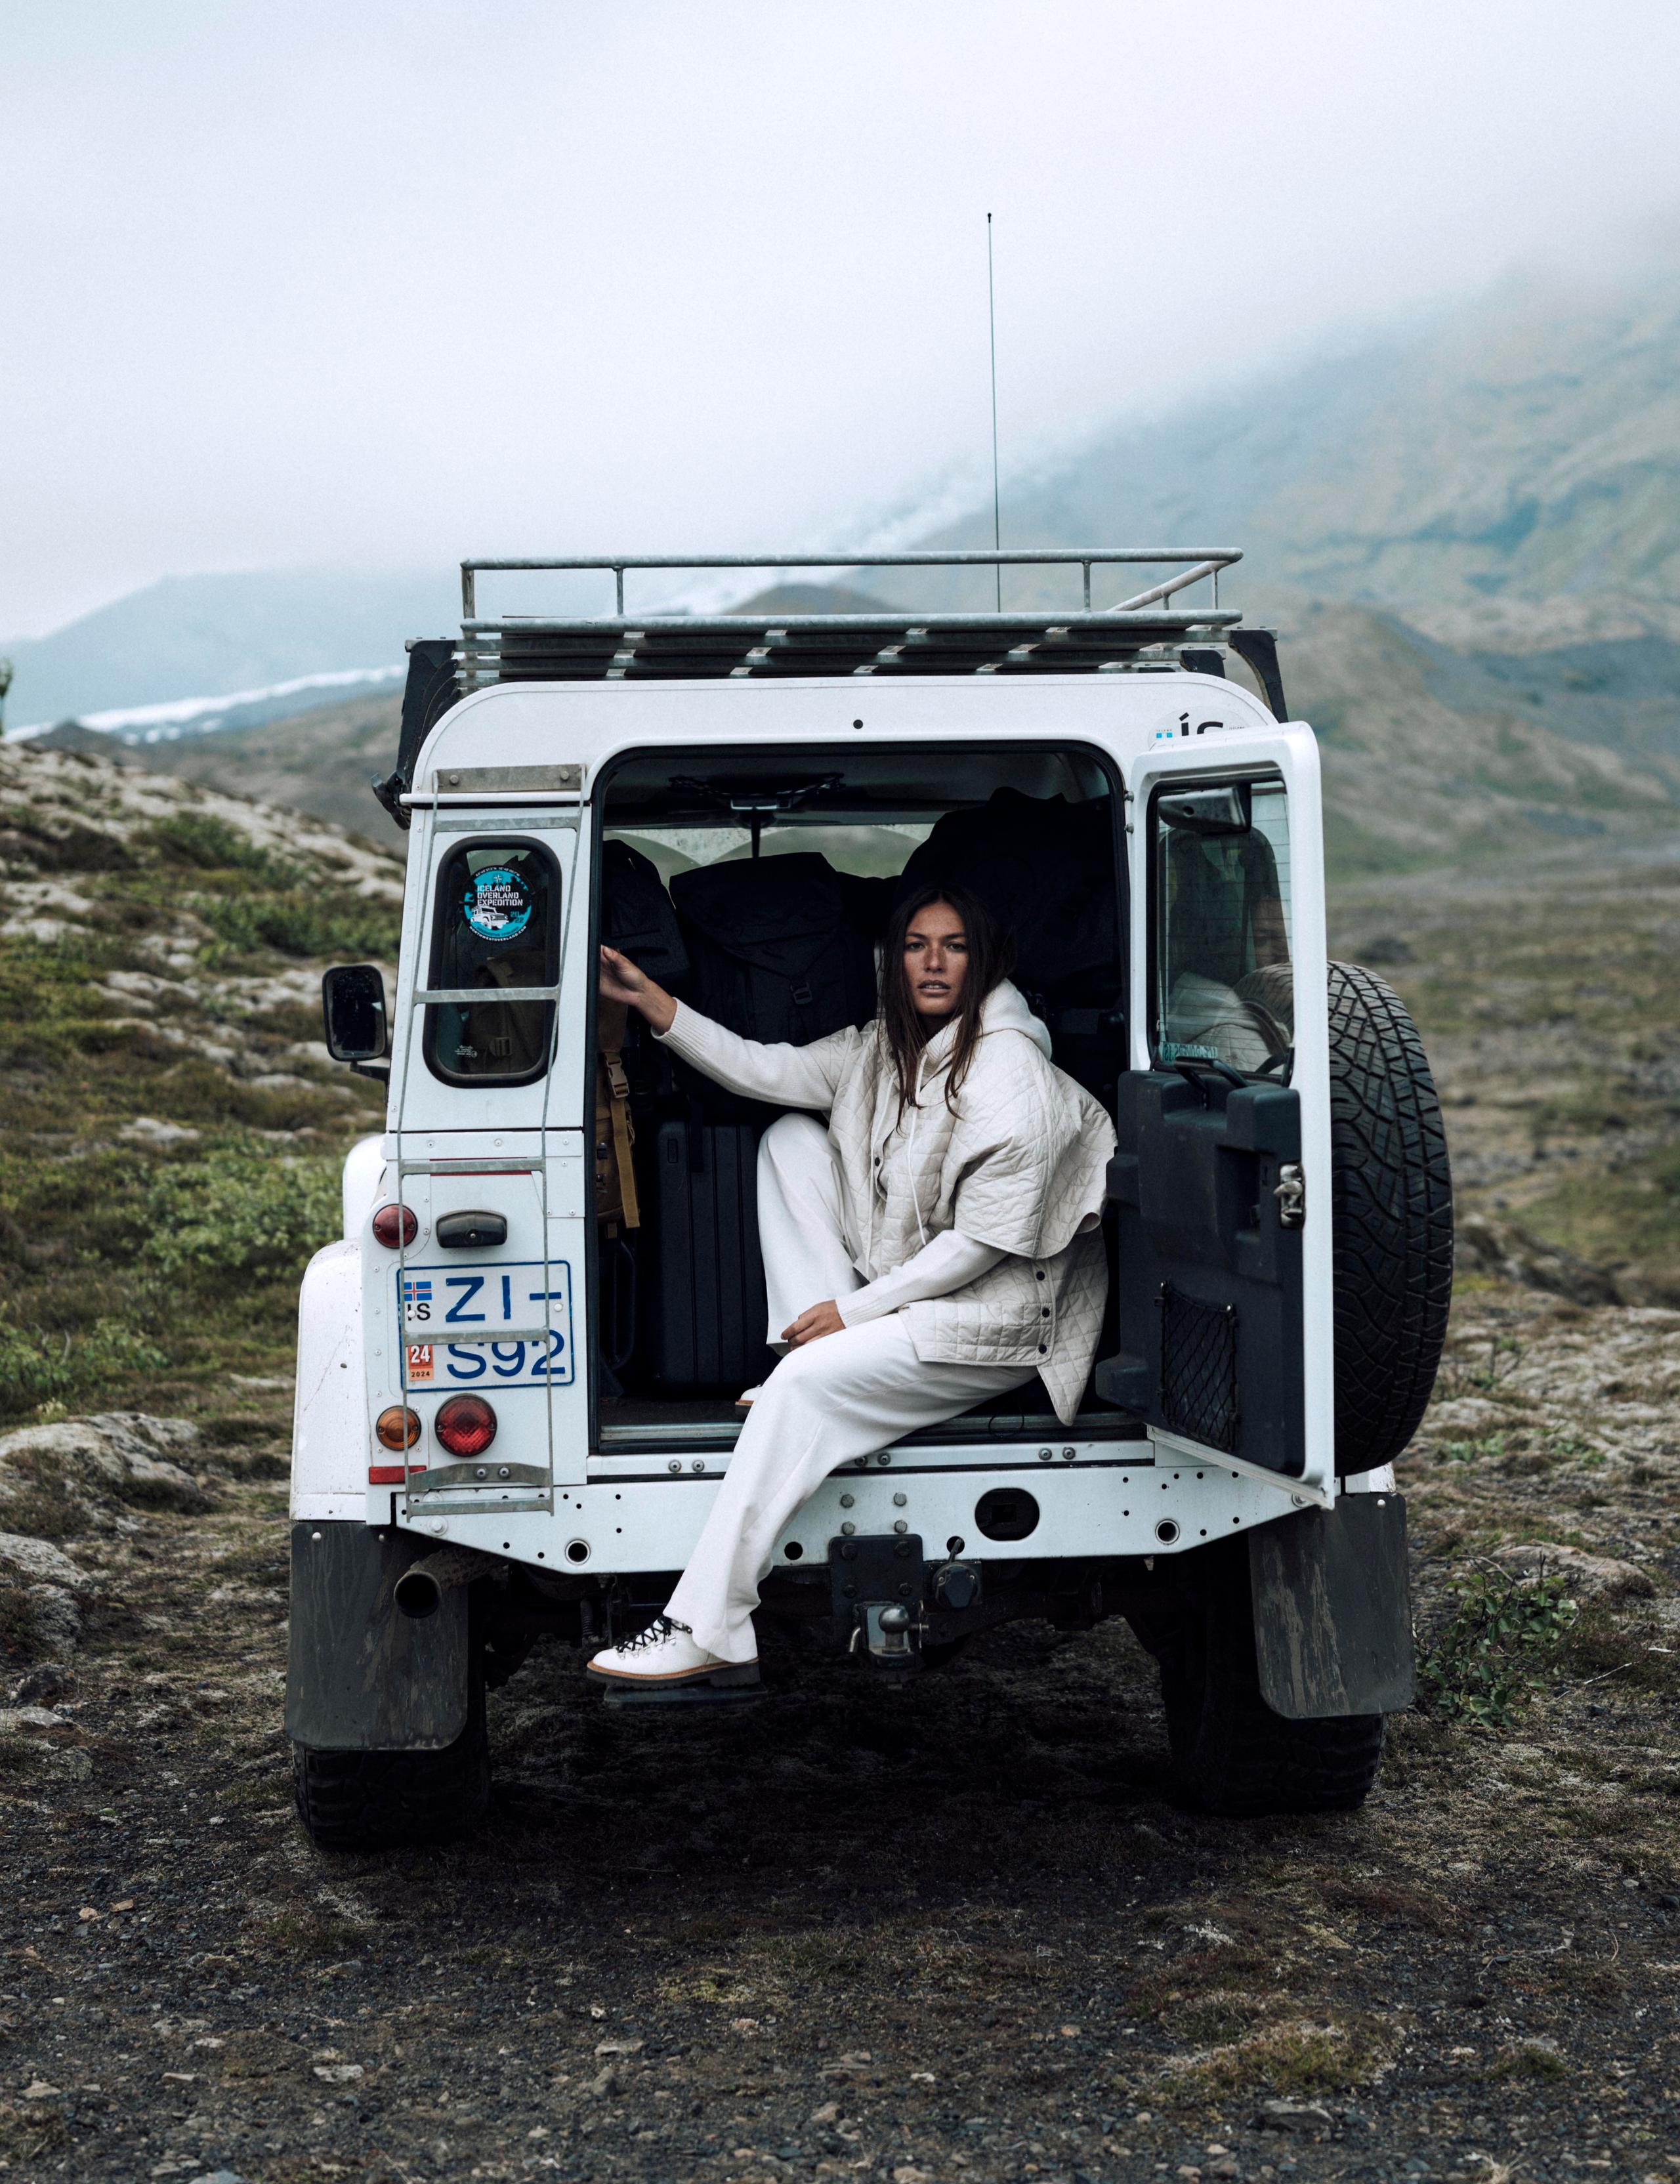 Woman lounging in back of white Defender in Iceland landscape